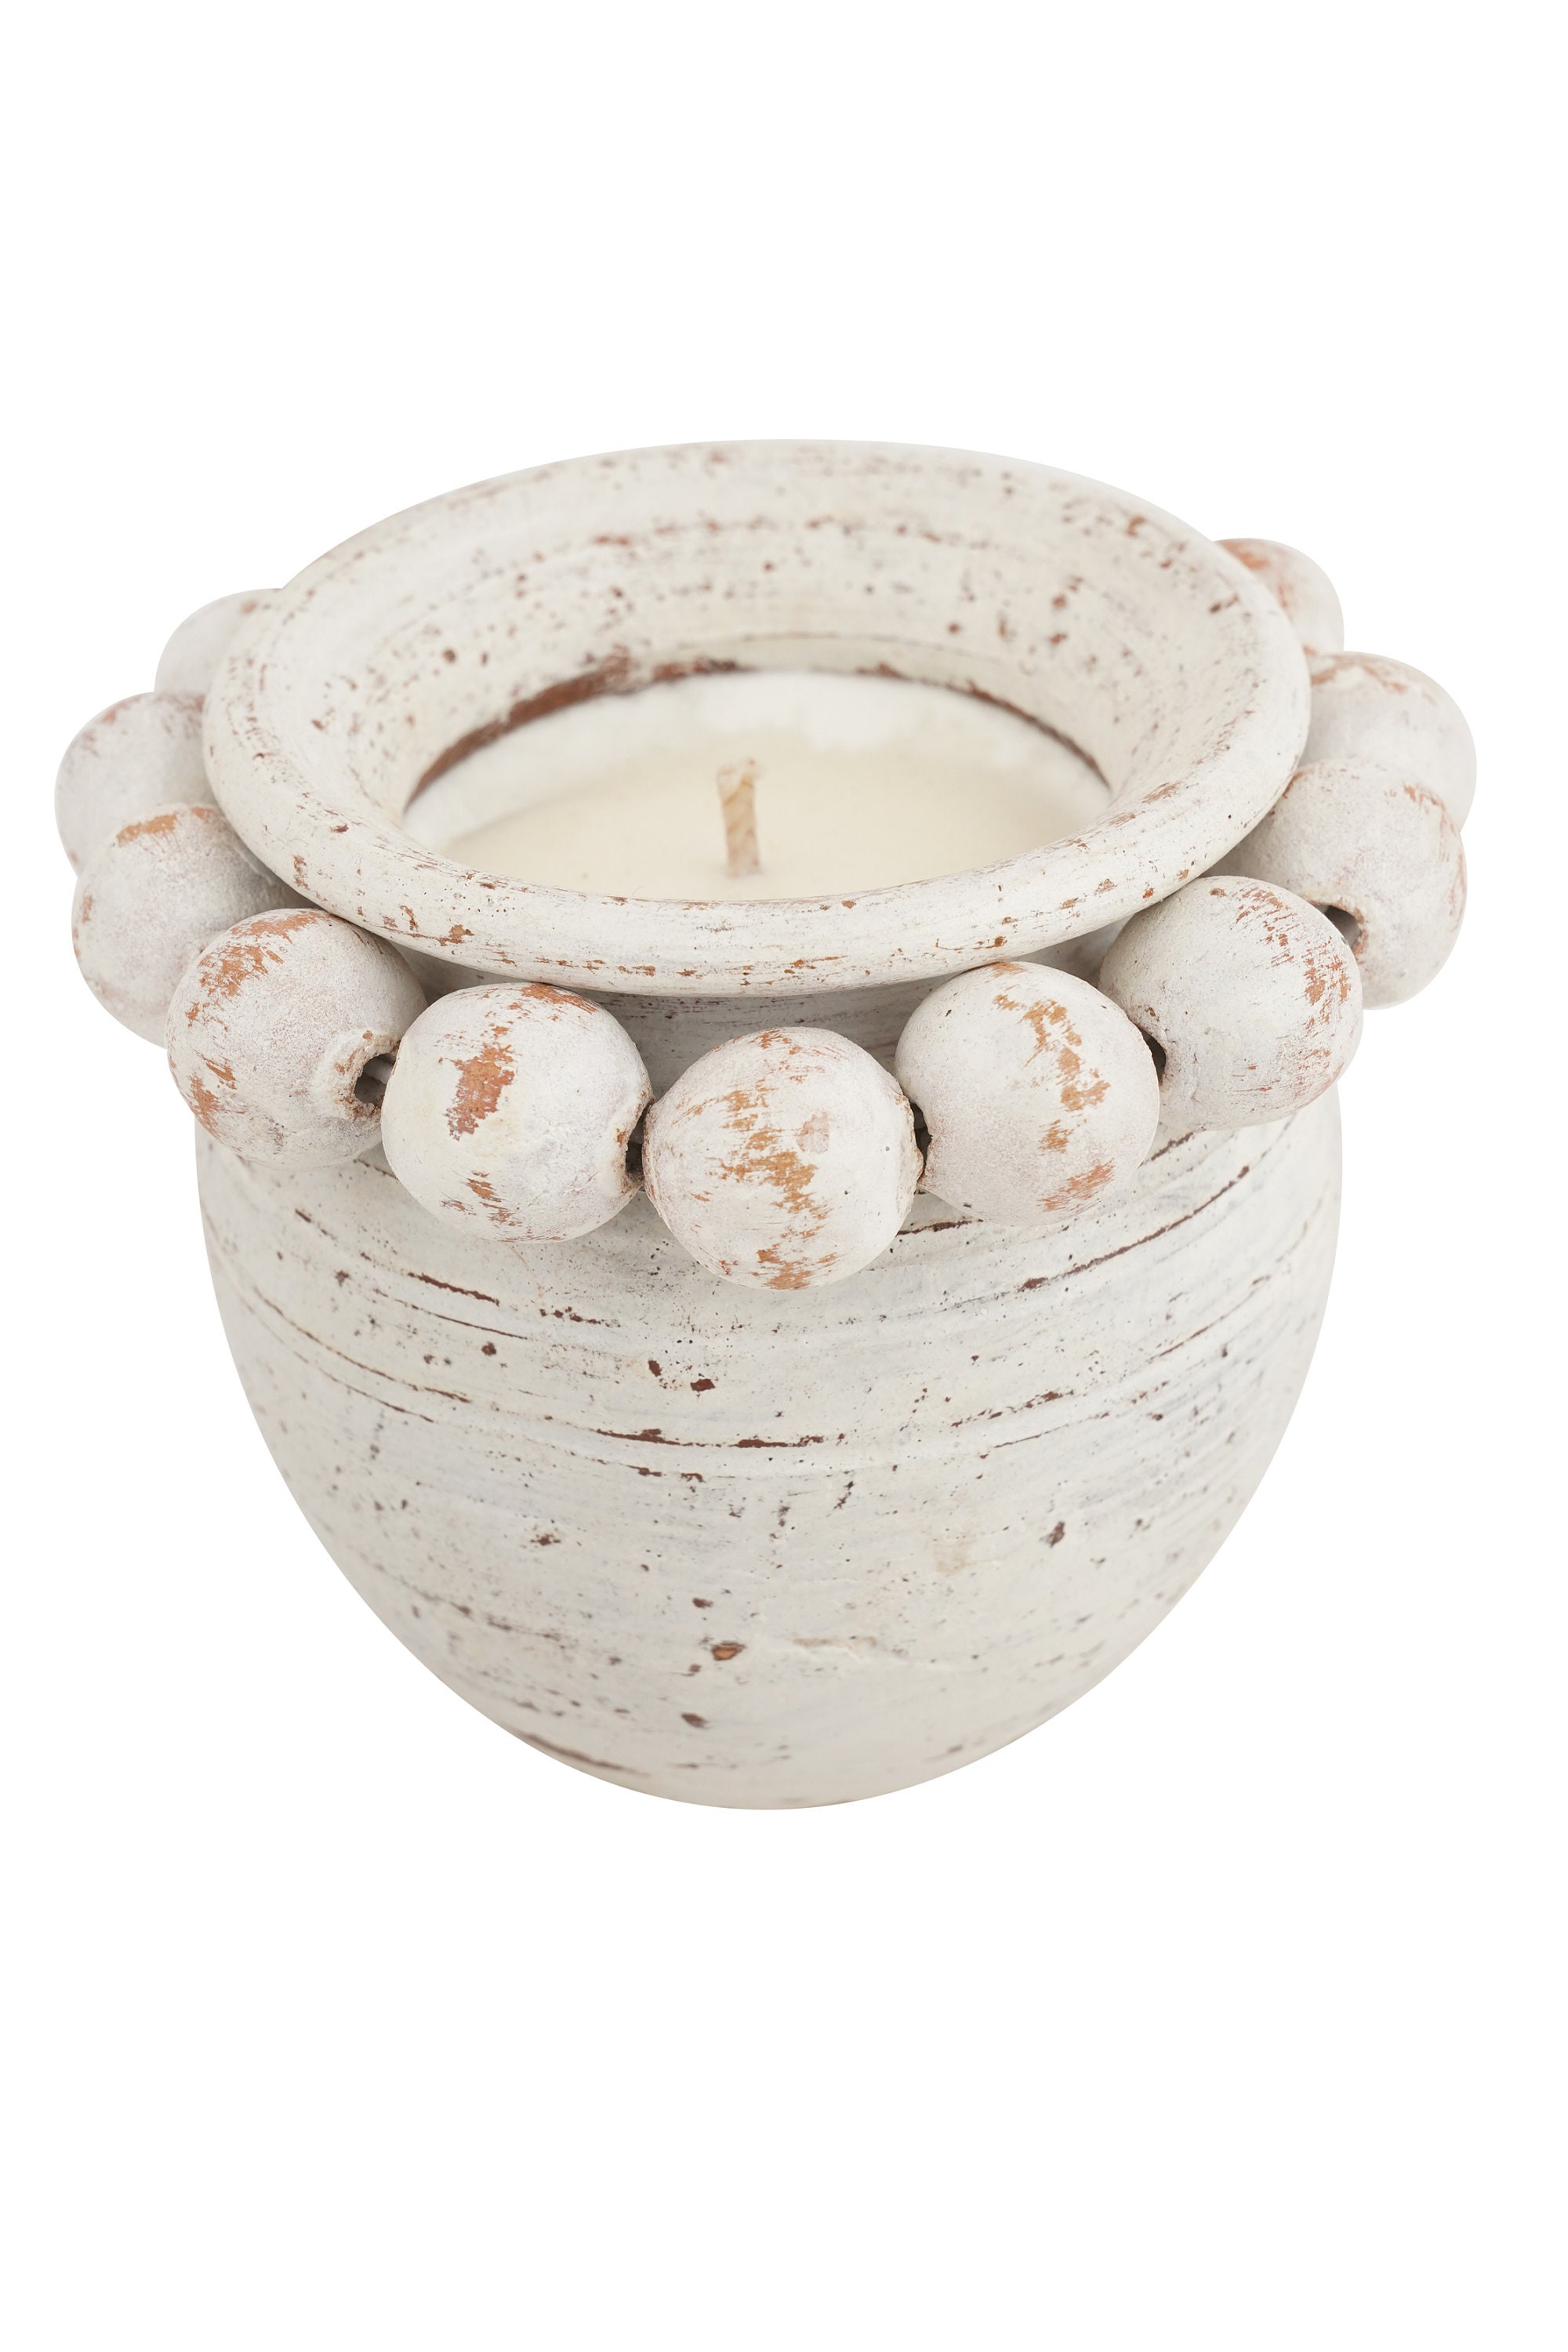 Hammered Decorative Bowl / Candle Holder - 6x3 inches